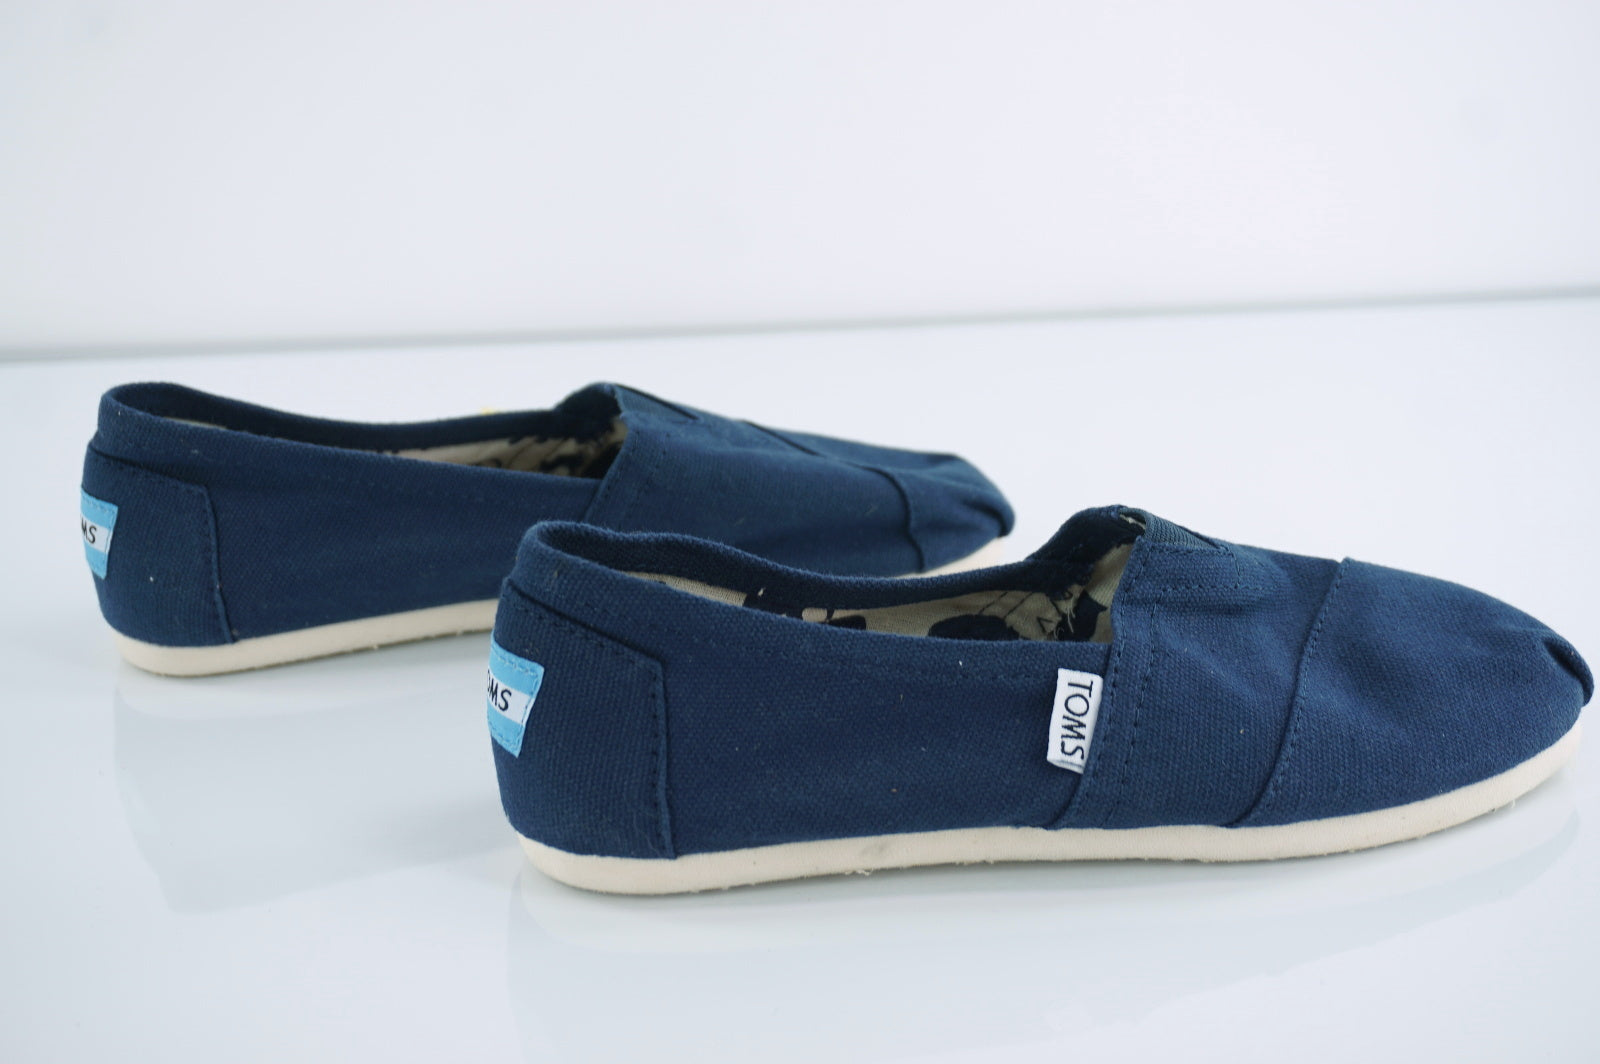 Toms Classic Canvas Womens Shoes Slip On Navy Blue Size 6 New